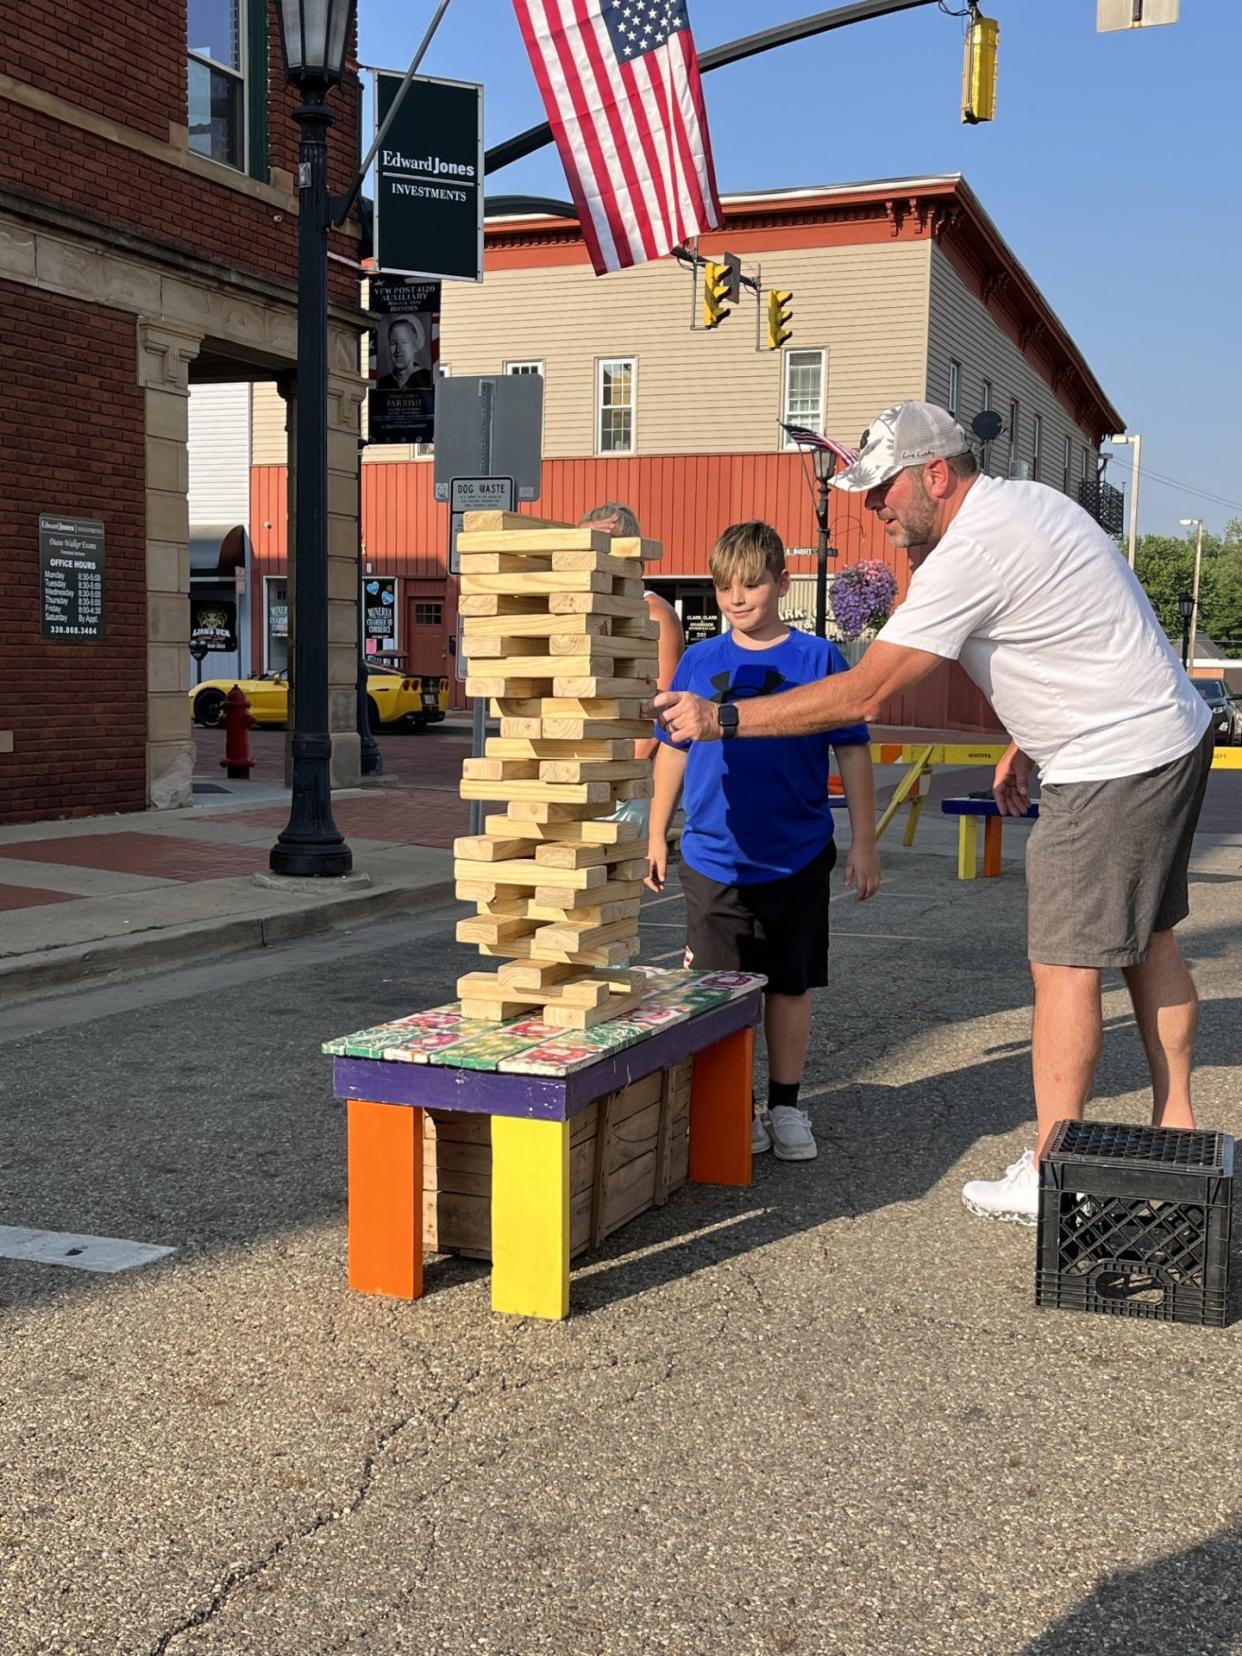 Minerva's popular Nights on North Market event, which includes family-friendly activities such as a giant Jenga game, will return in May and be held on the second Fridays of each month.